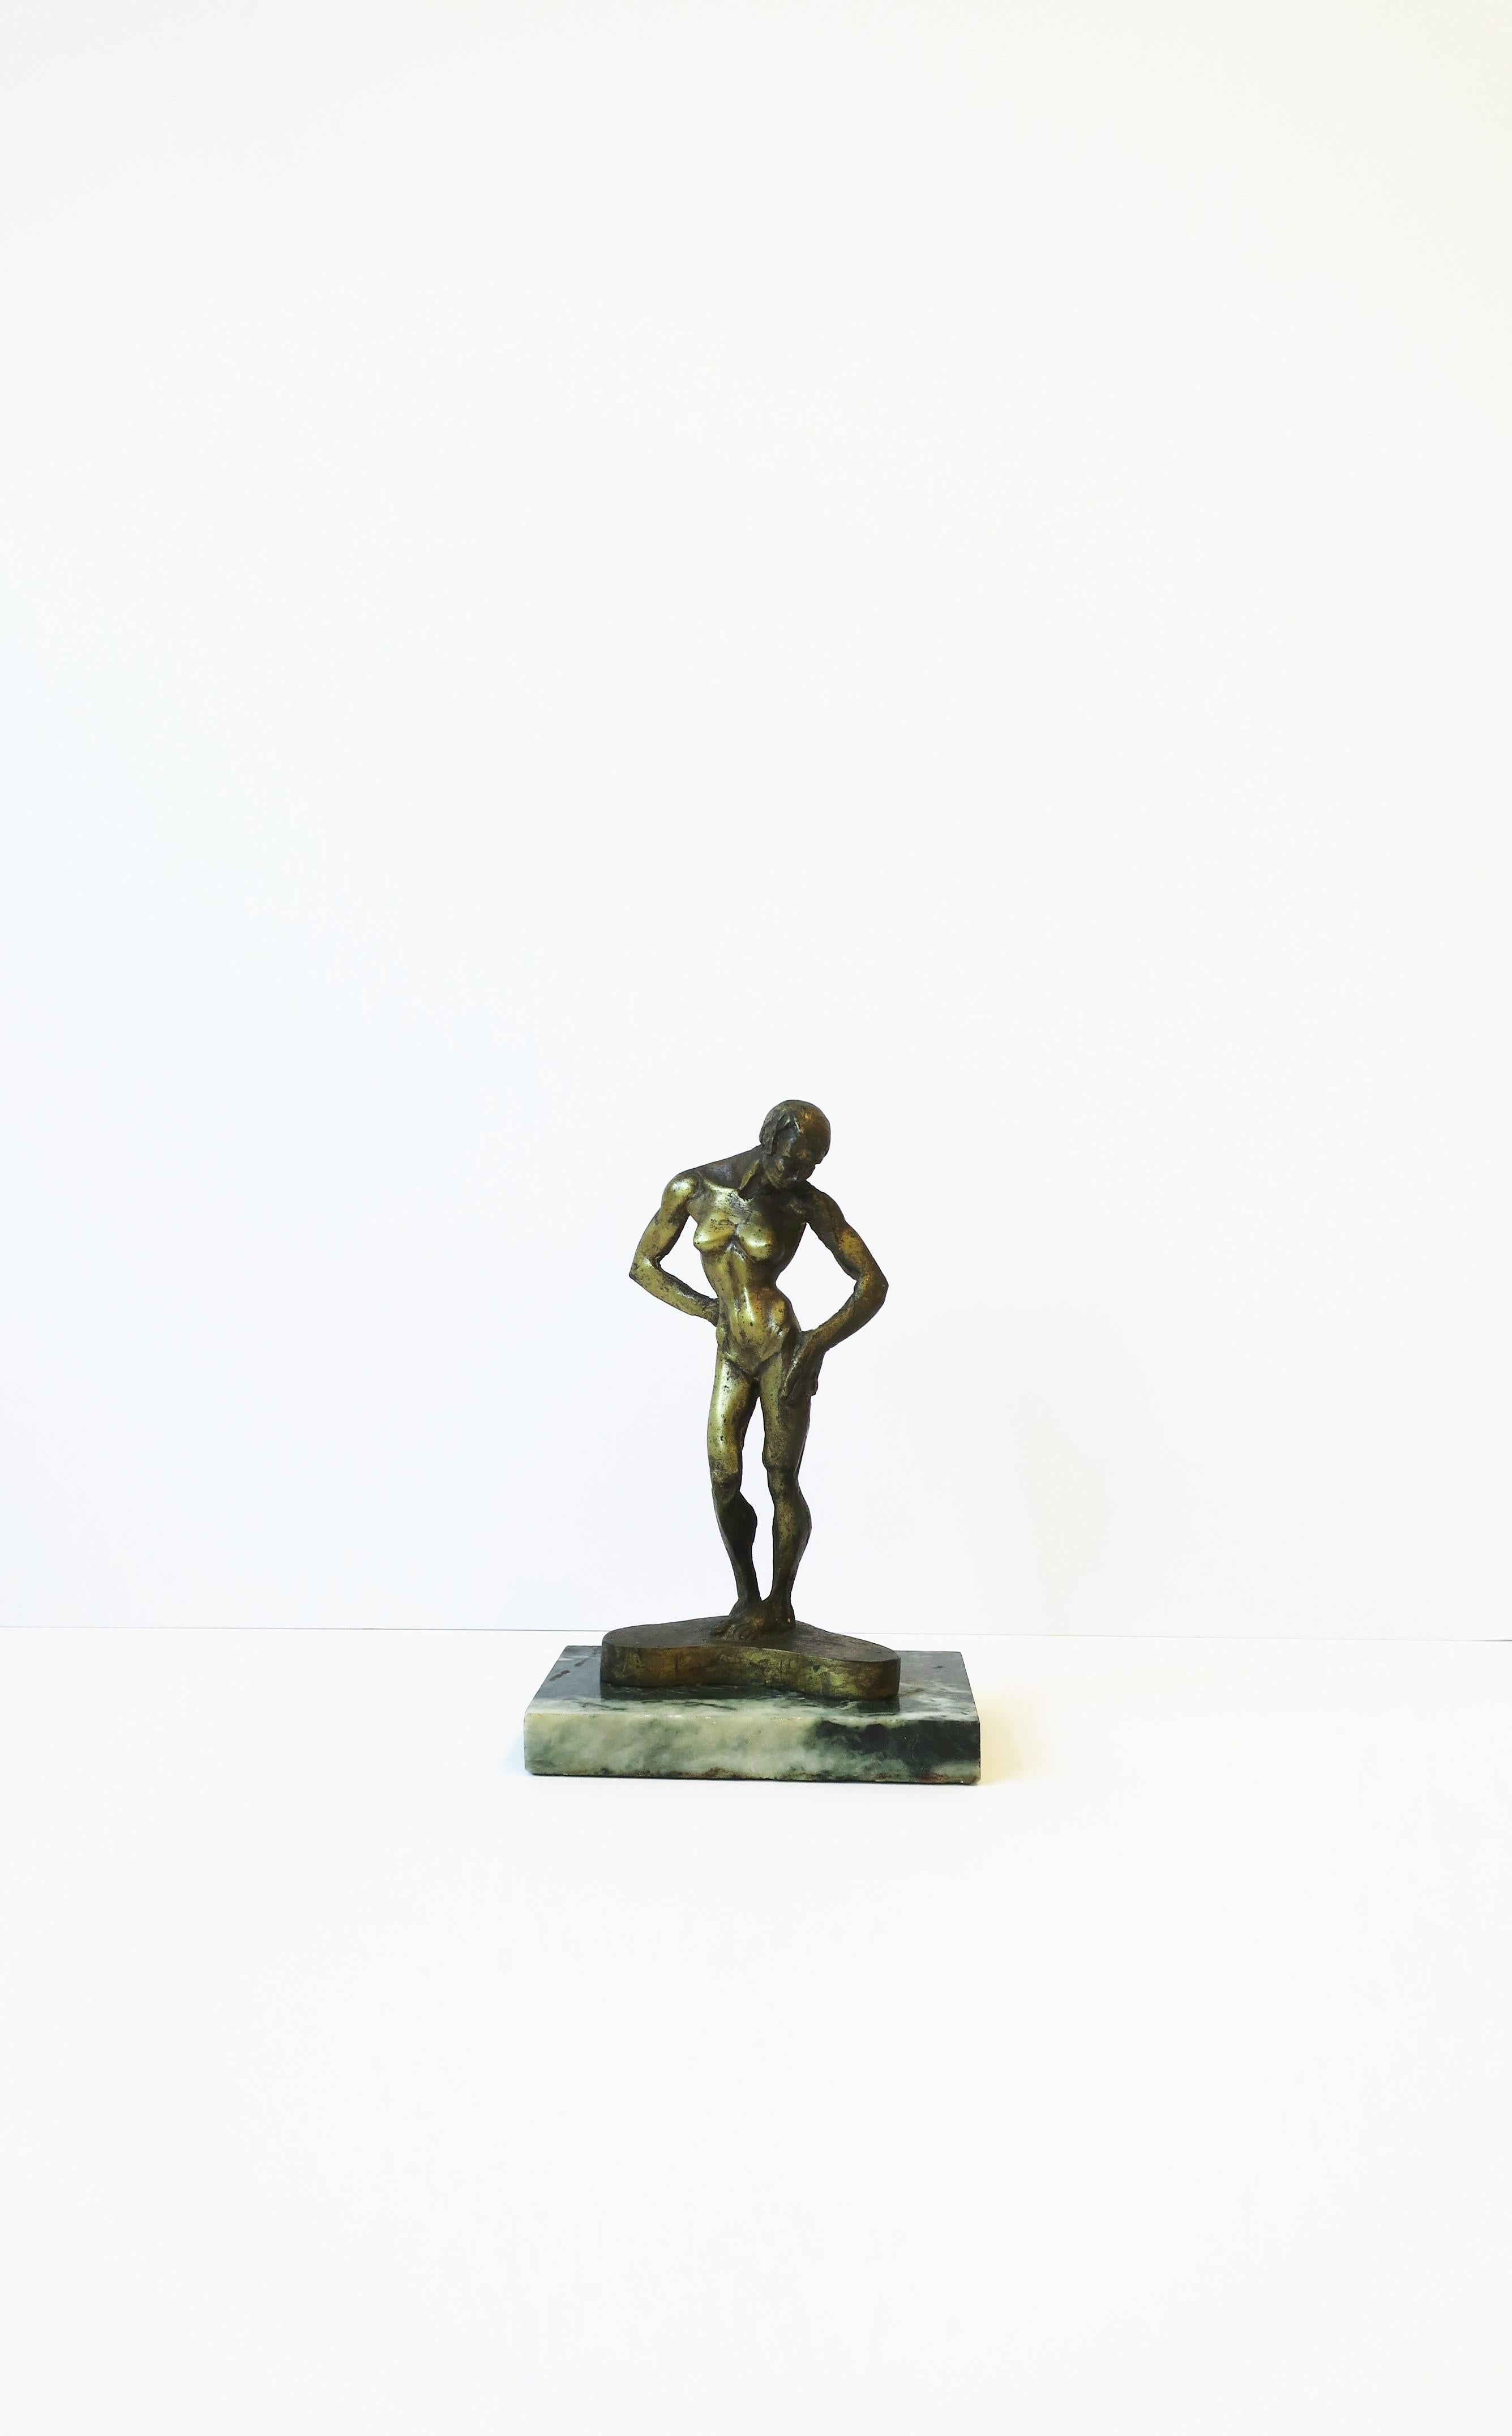 A beautiful and substantial signed and numbered female figurative gilt bronze sculpture on a dark green with white veining marble base, by sculptor Michael Shacham, 1977. A beautifully toned female figure bronze sculpture in the Art Deco design